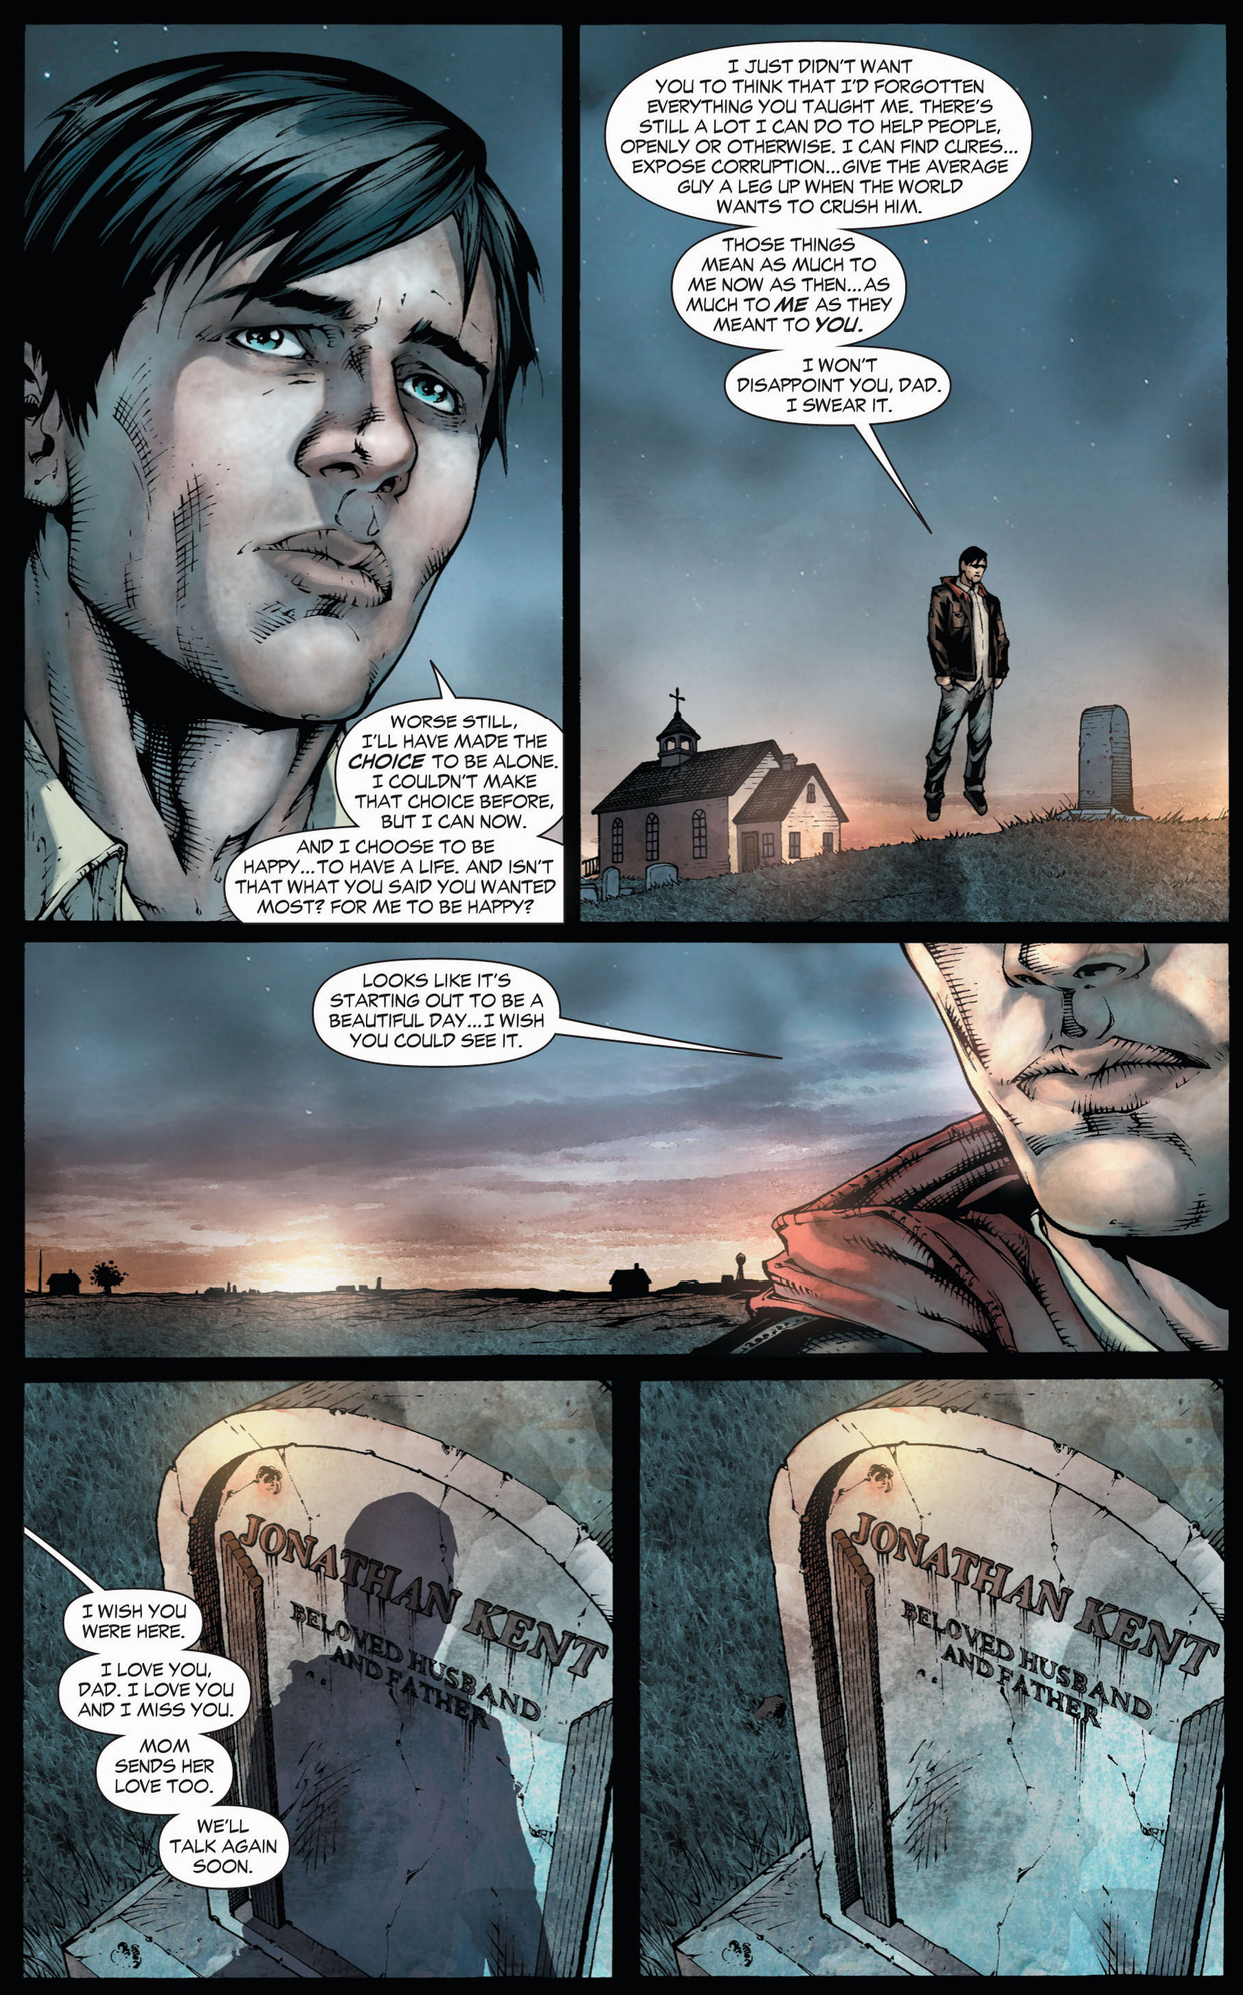 clark kent visits his father's grave (earth 1)